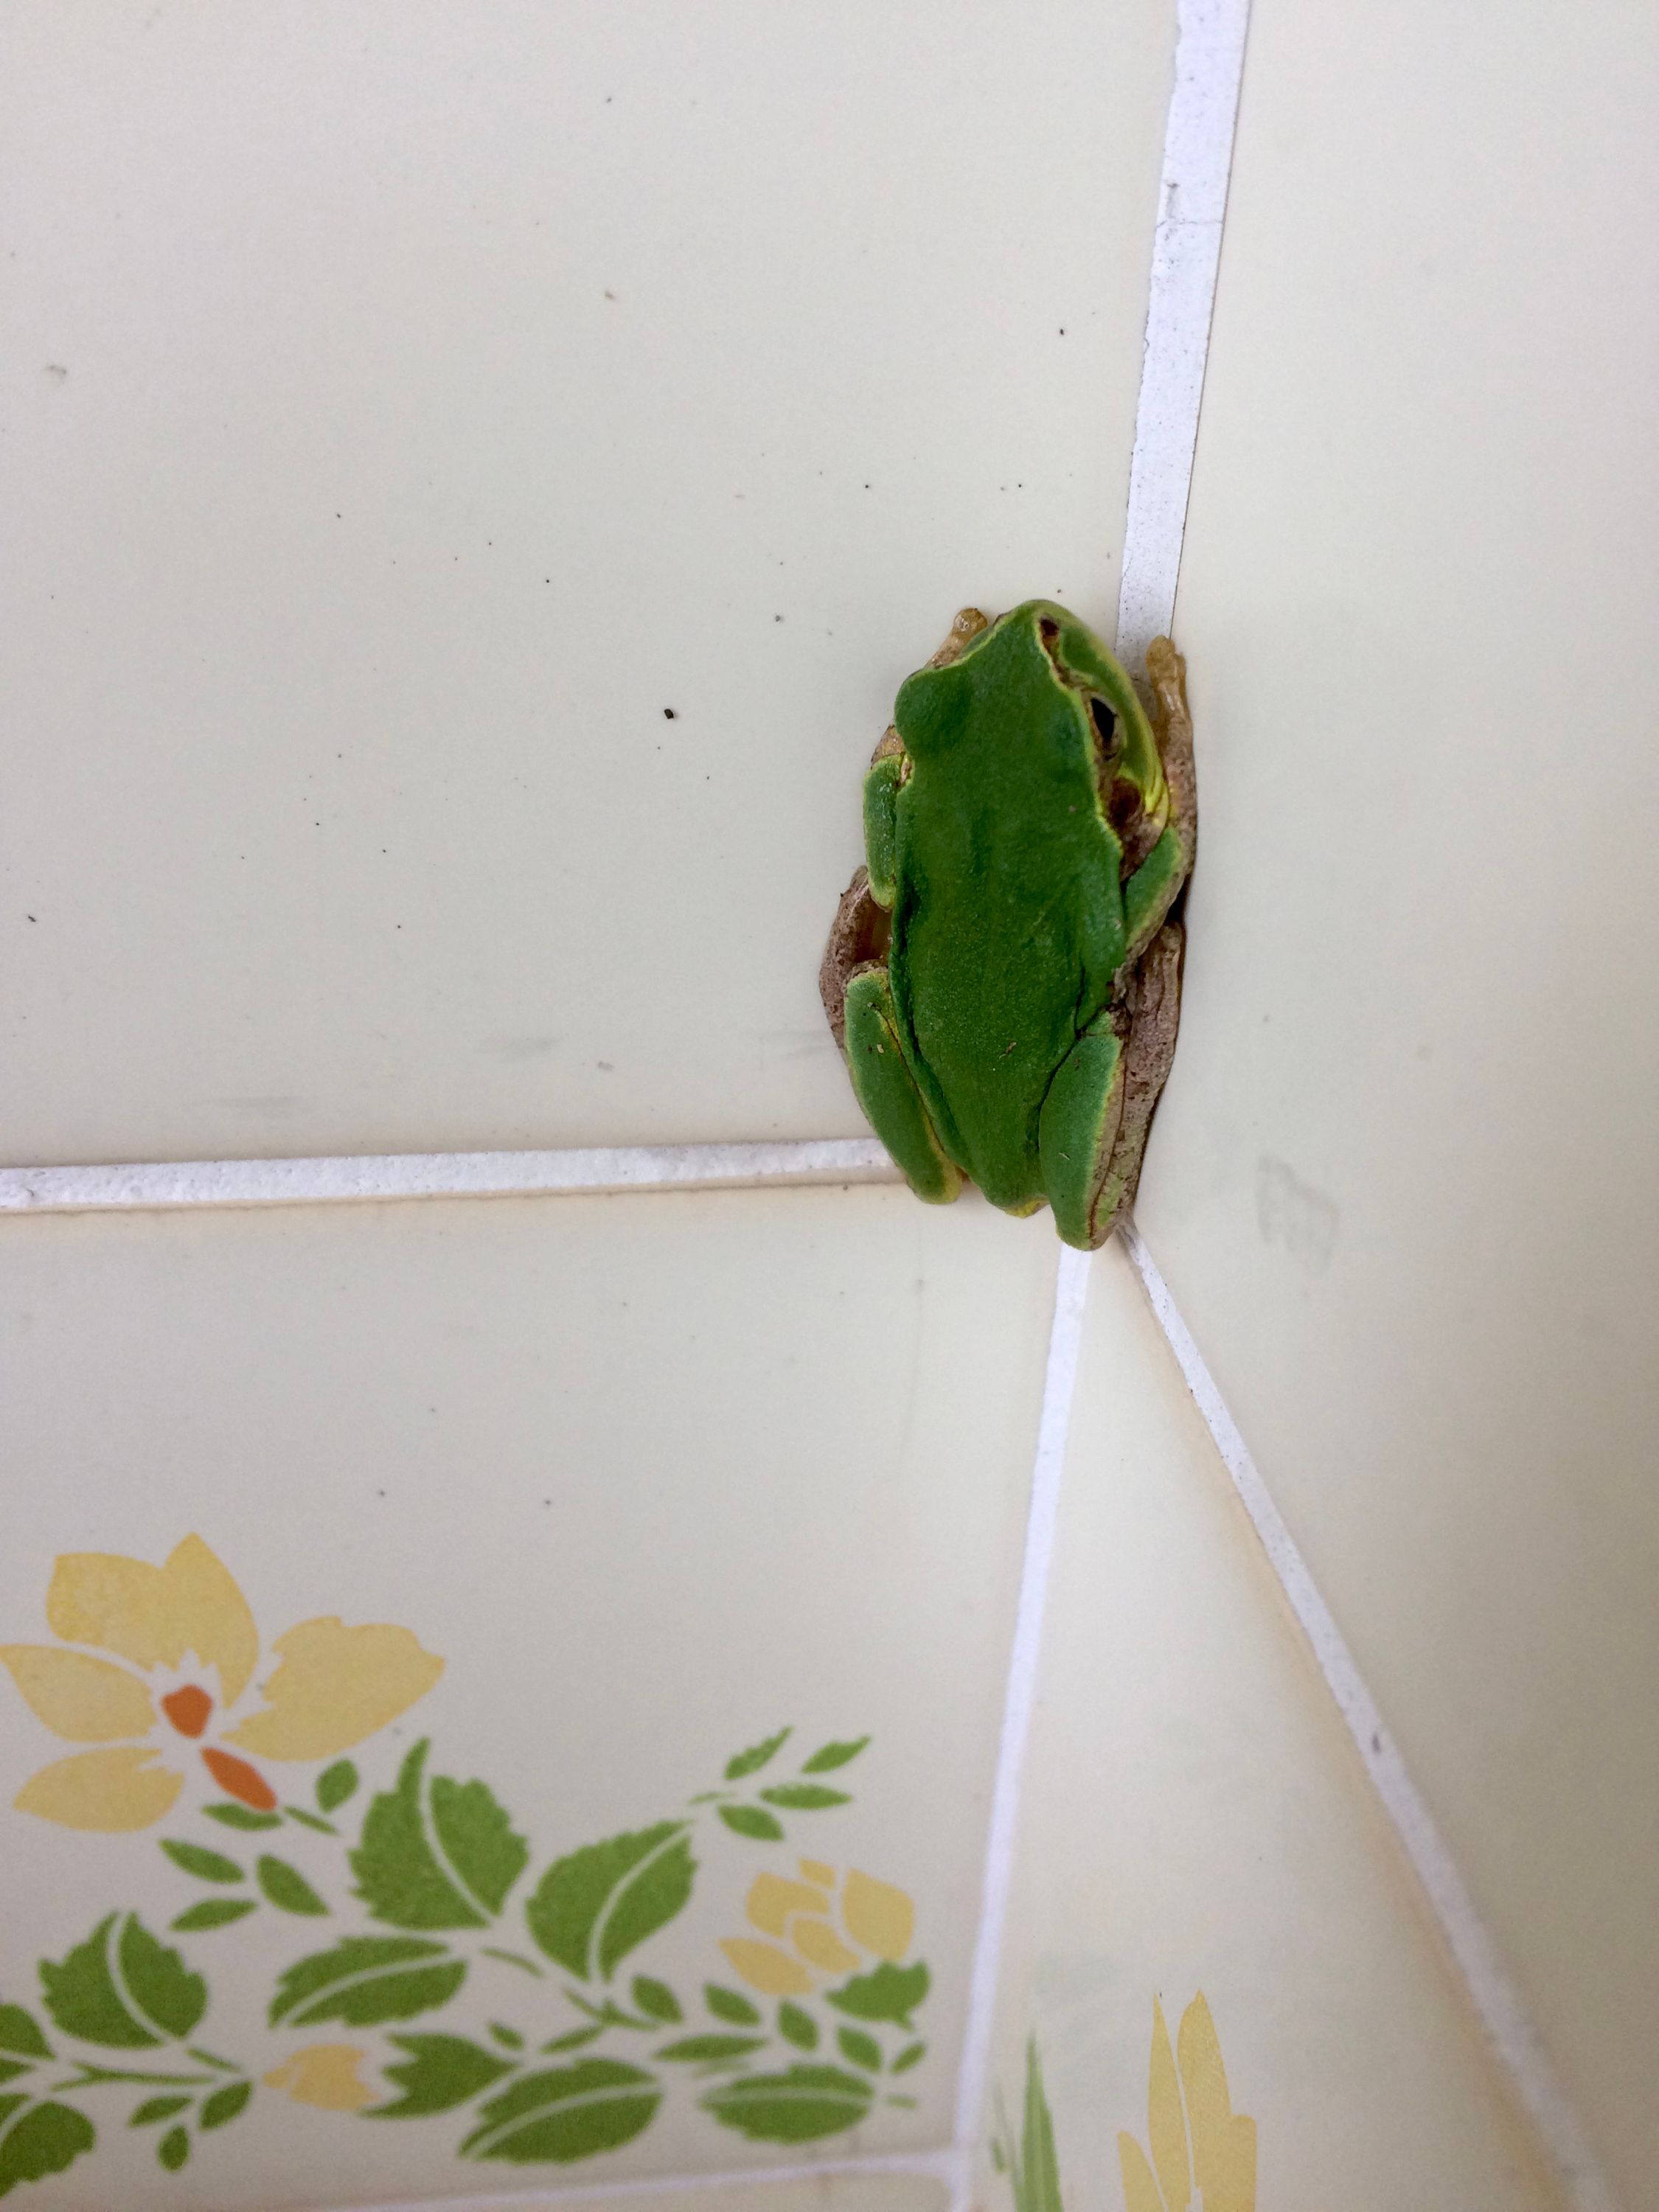 A small tree frog squats on a tiled wall, one of the tiles is printed with leaves the same color as the frog.